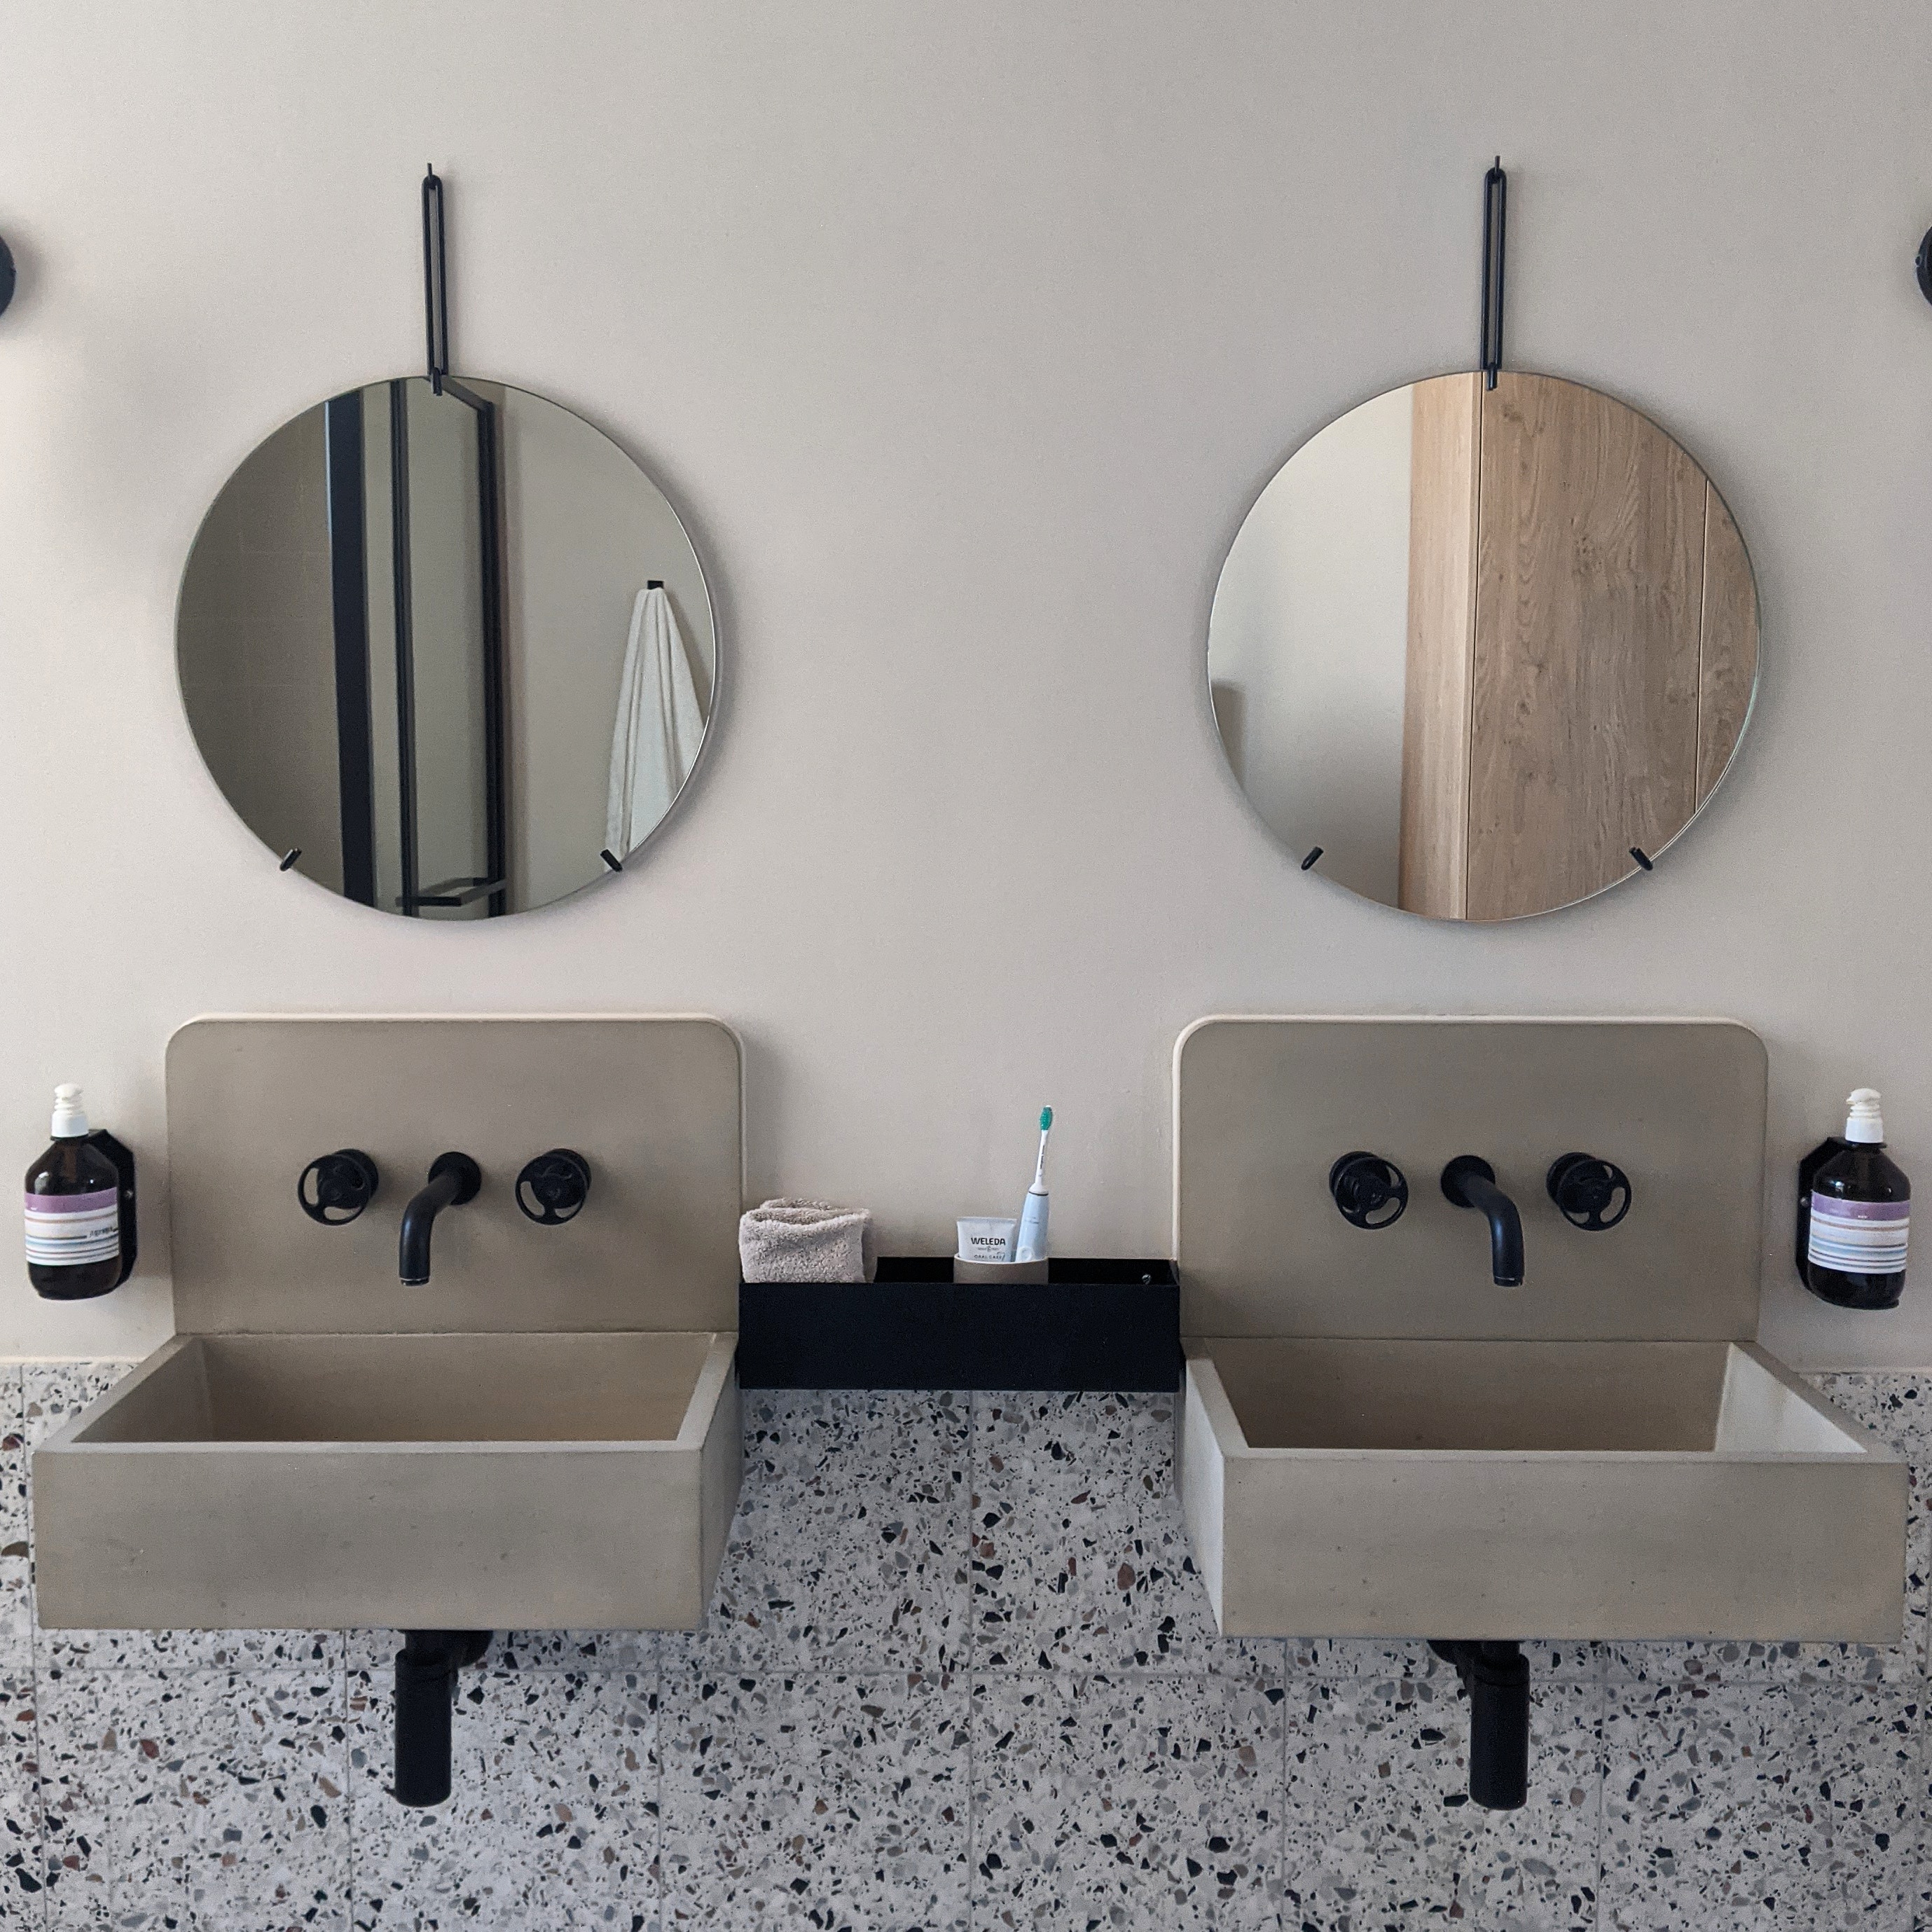 bathroom details at port hotel including circular mirrors and beautiful concrete sinks